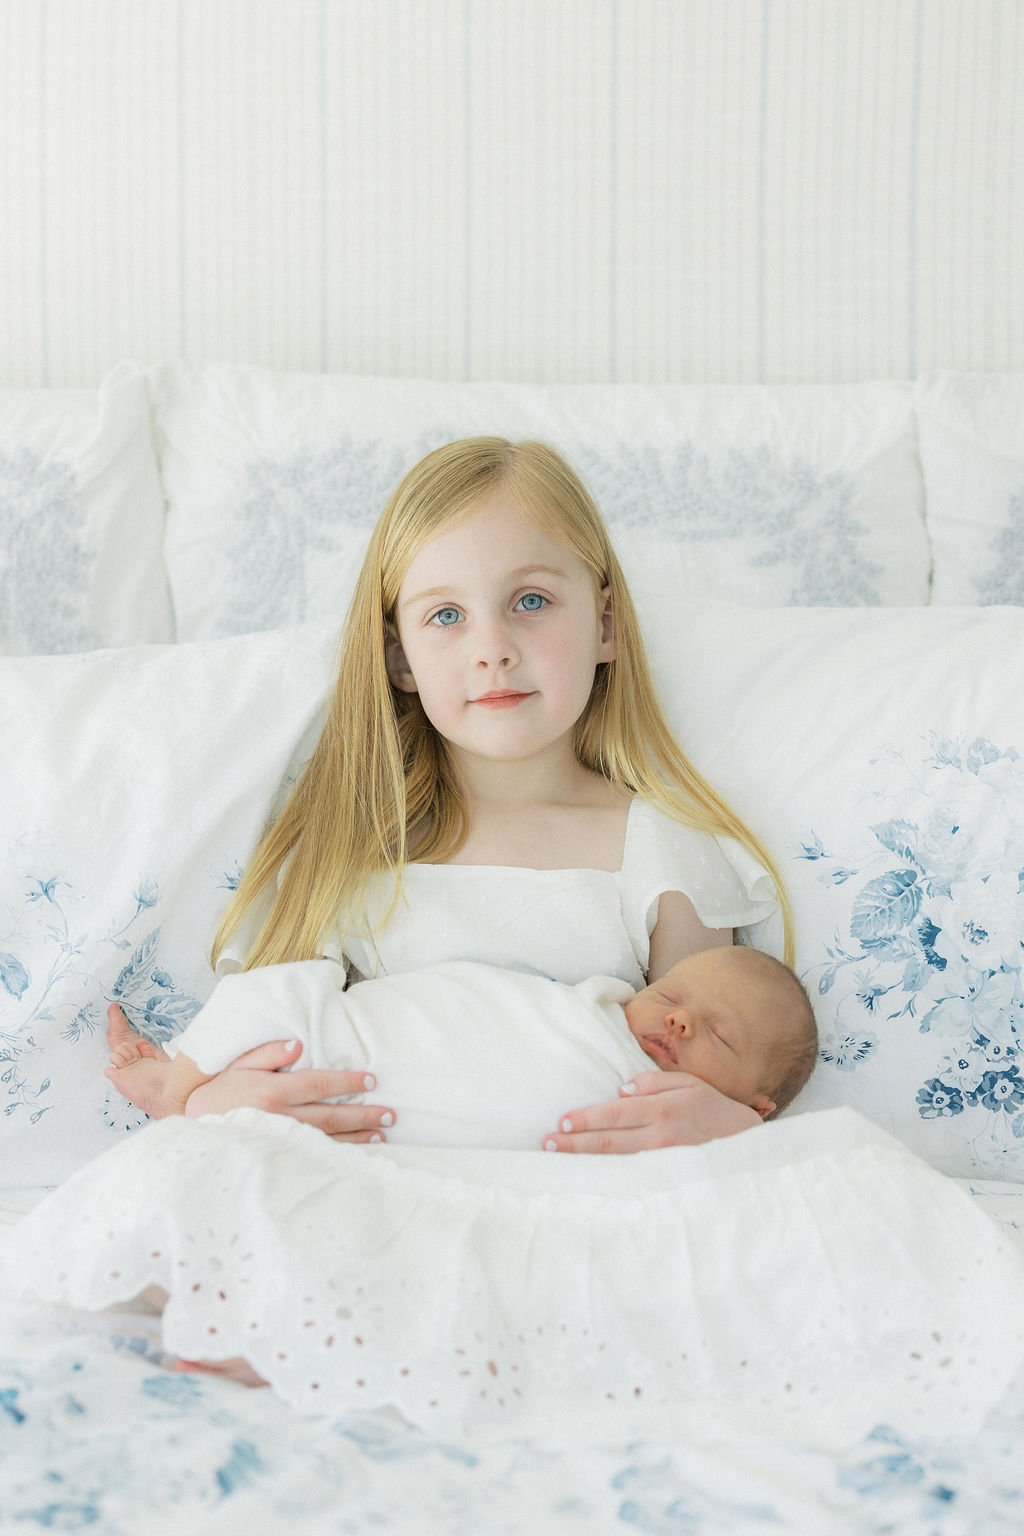 A young girl sits on a floral print bed holding her sleeping newborn baby sibling in her lap